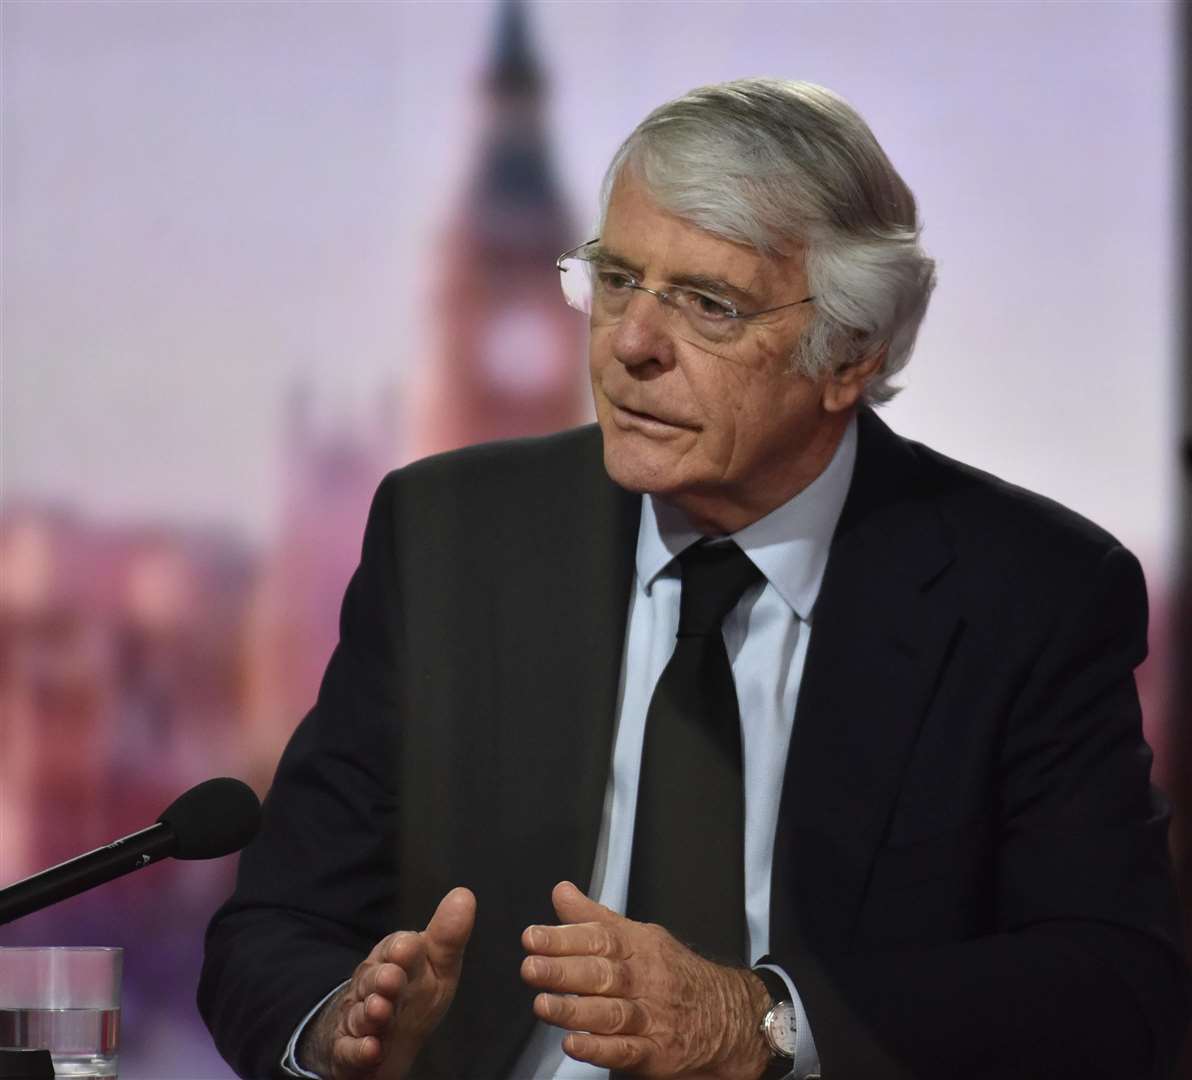 Former prime minister Sir John Major proposed a general tax increase instead (Jeff Overs/BBC/PA)